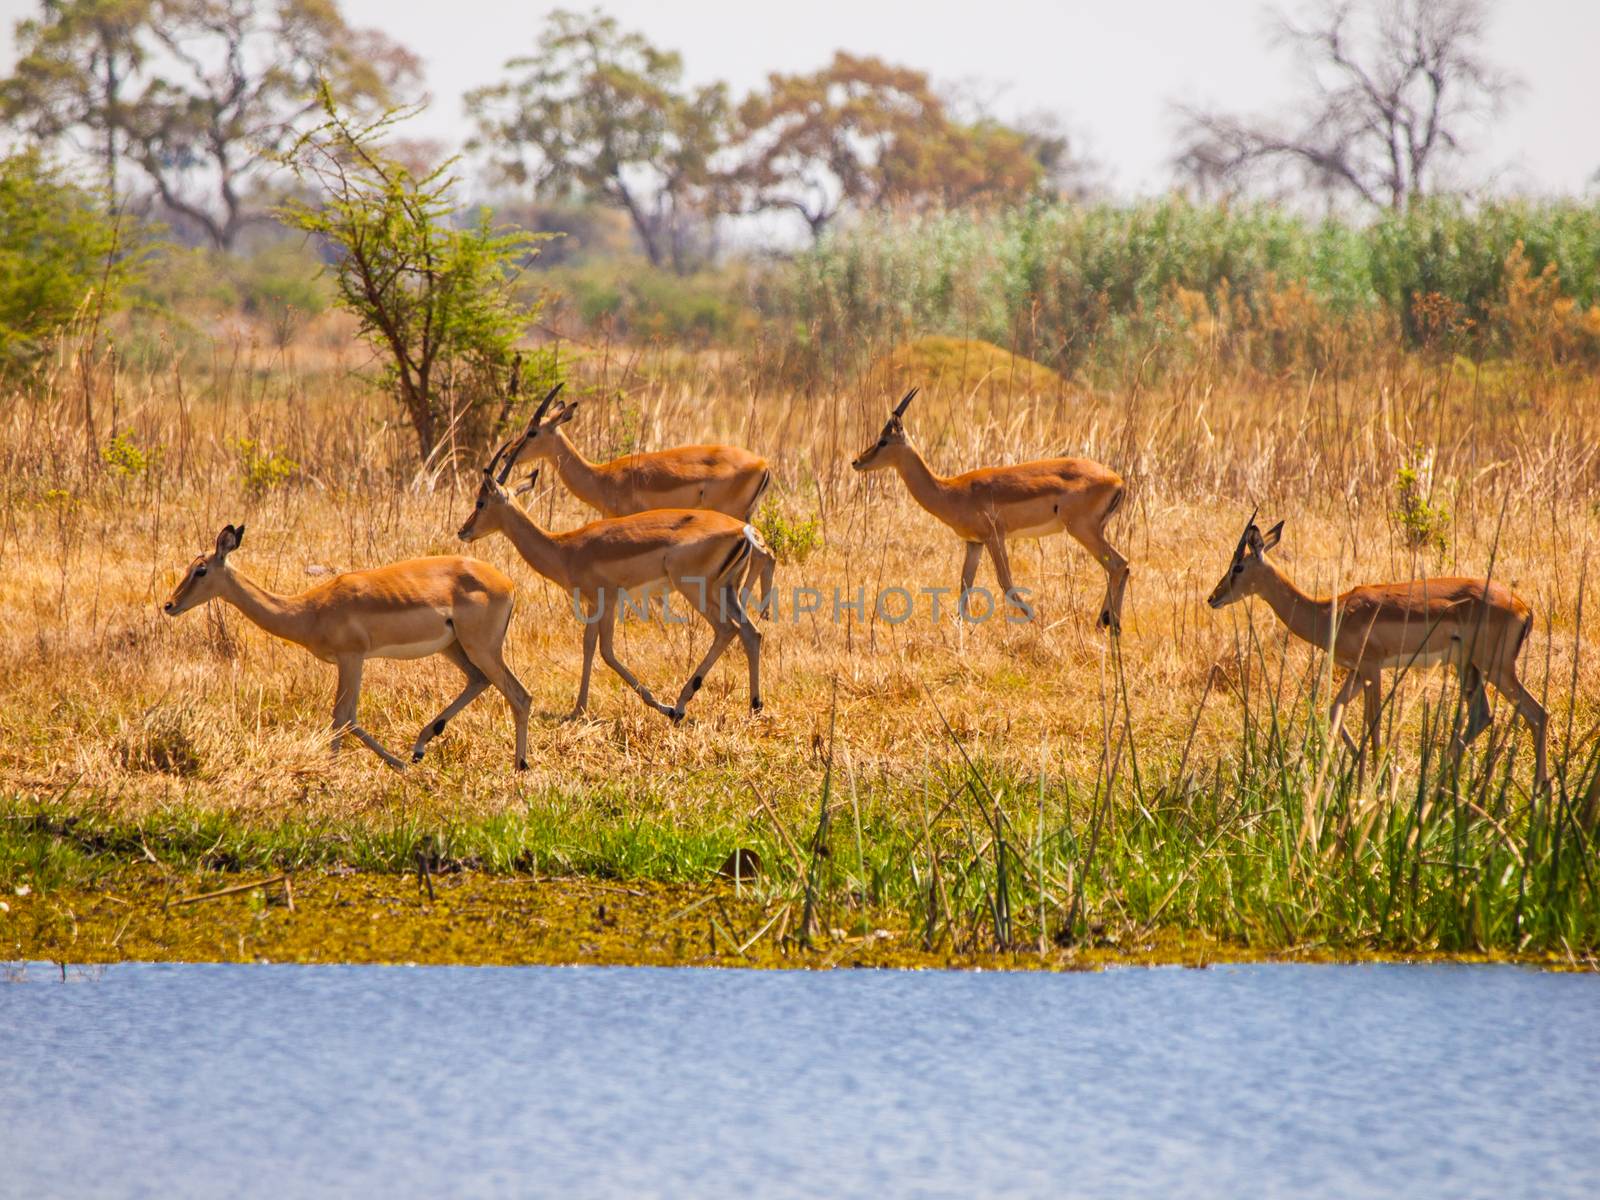 Impala herd by pyty